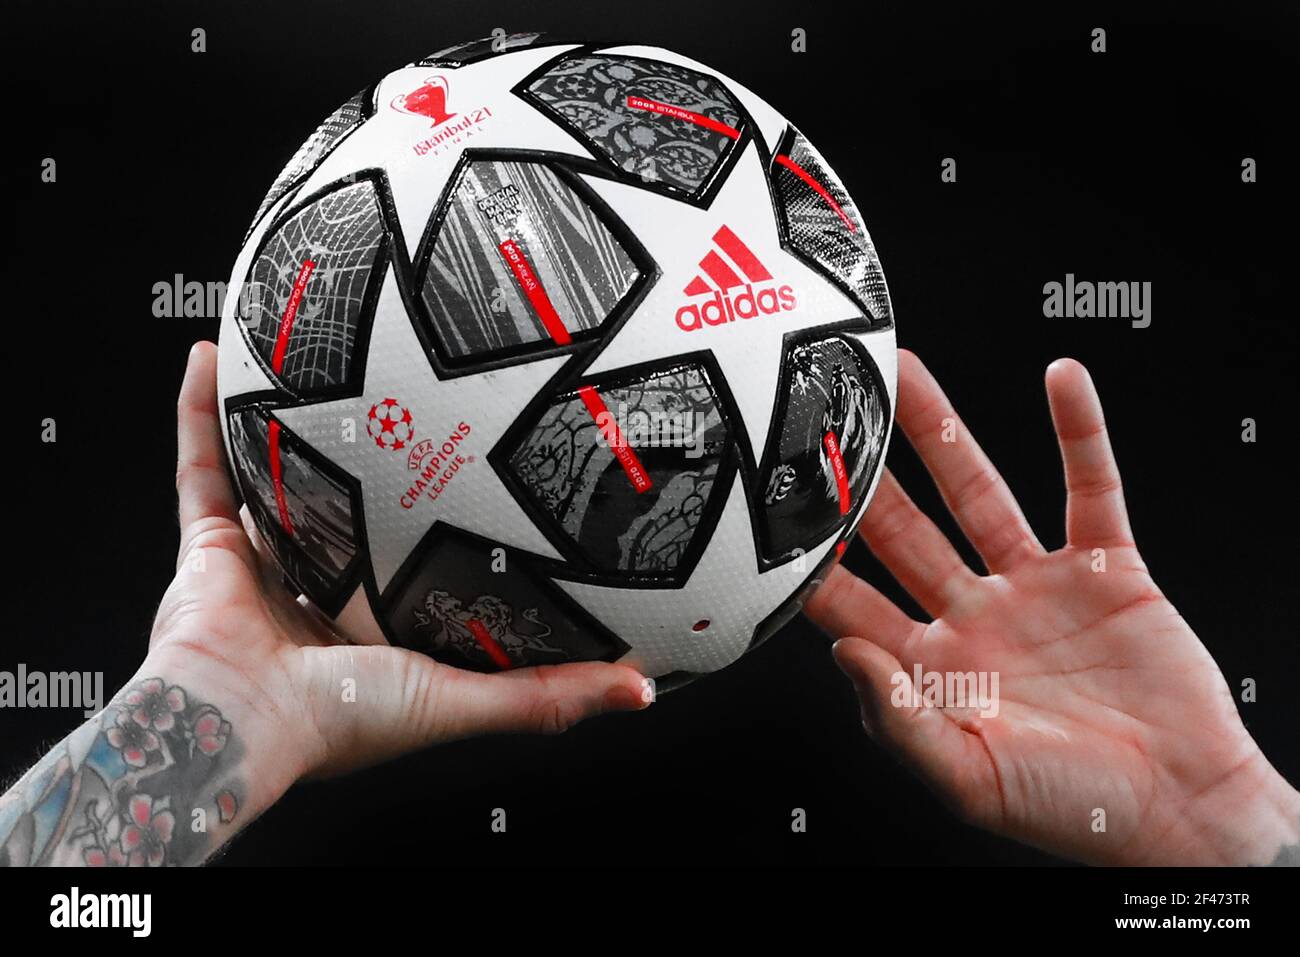 Official Adidas Istanbul 21Finale match ball - Chelsea v Atletico Madrid,  UEFA Champions League - Round of 16 Second Leg, Stamford Bridge, London, UK  - 17th March 2021 Editorial Use Only Stock Photo - Alamy